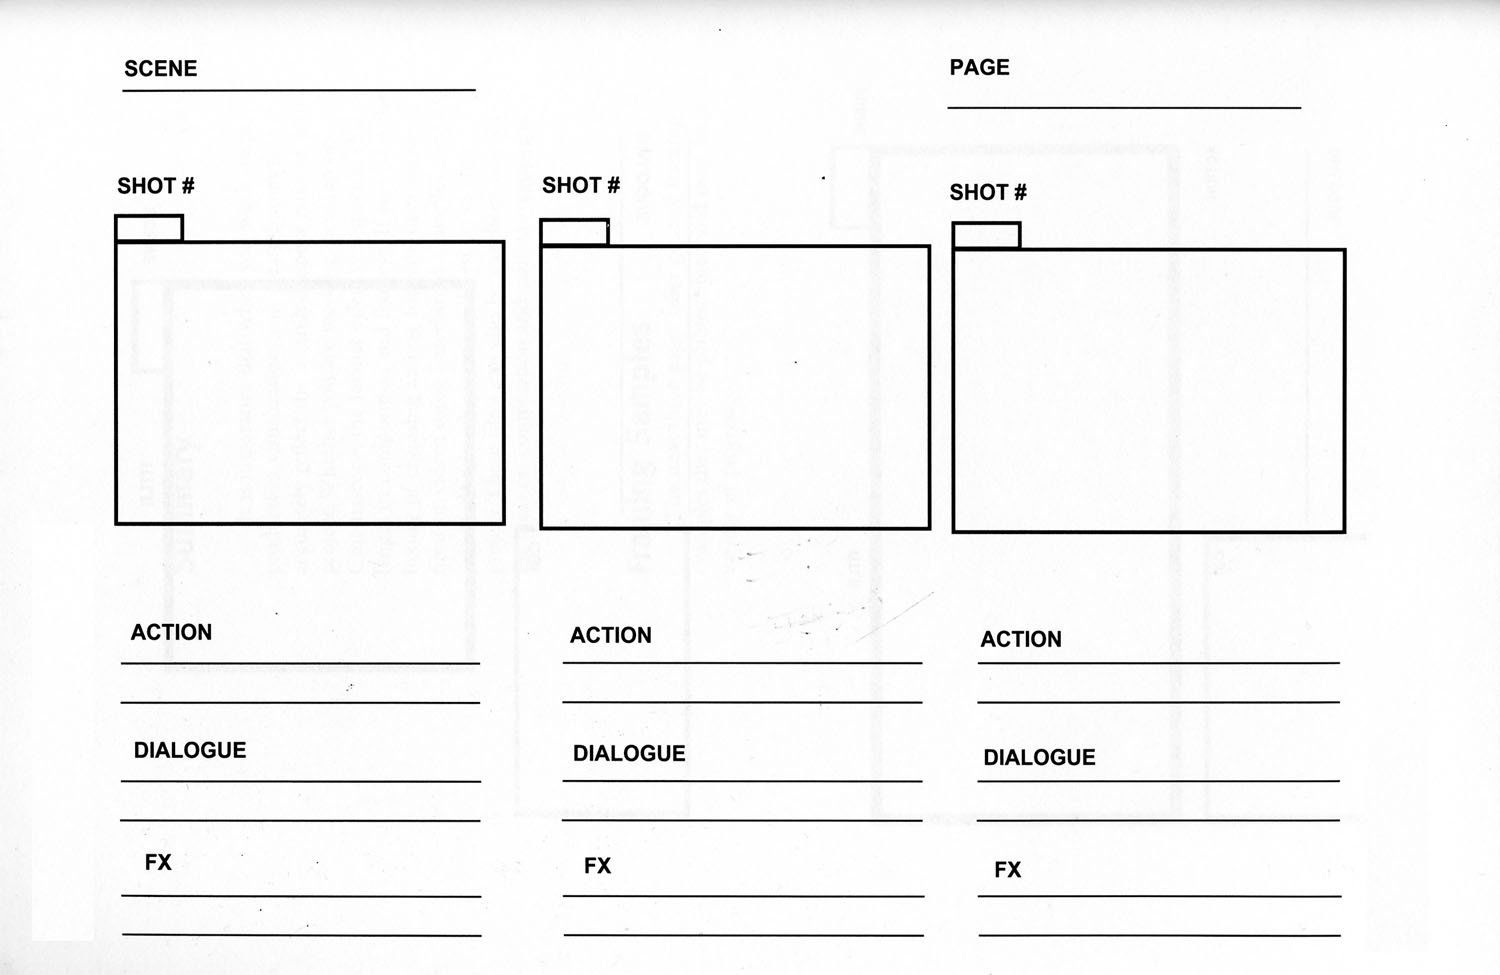 A storyboard is a visual organizer for plotting out a tale. Storyboards are an effective method to graphically convey information